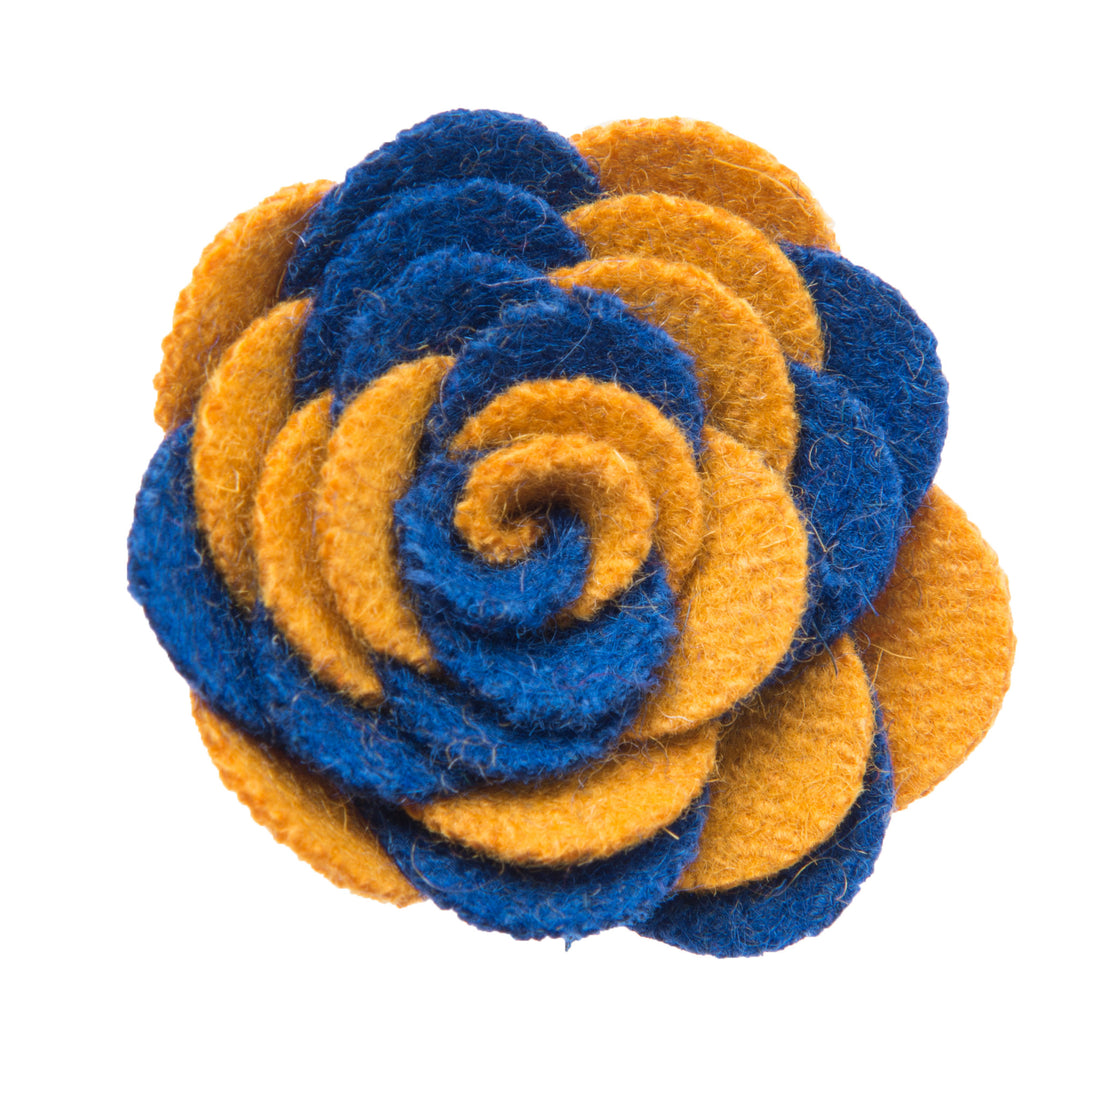 Blue and yellow lapel flower